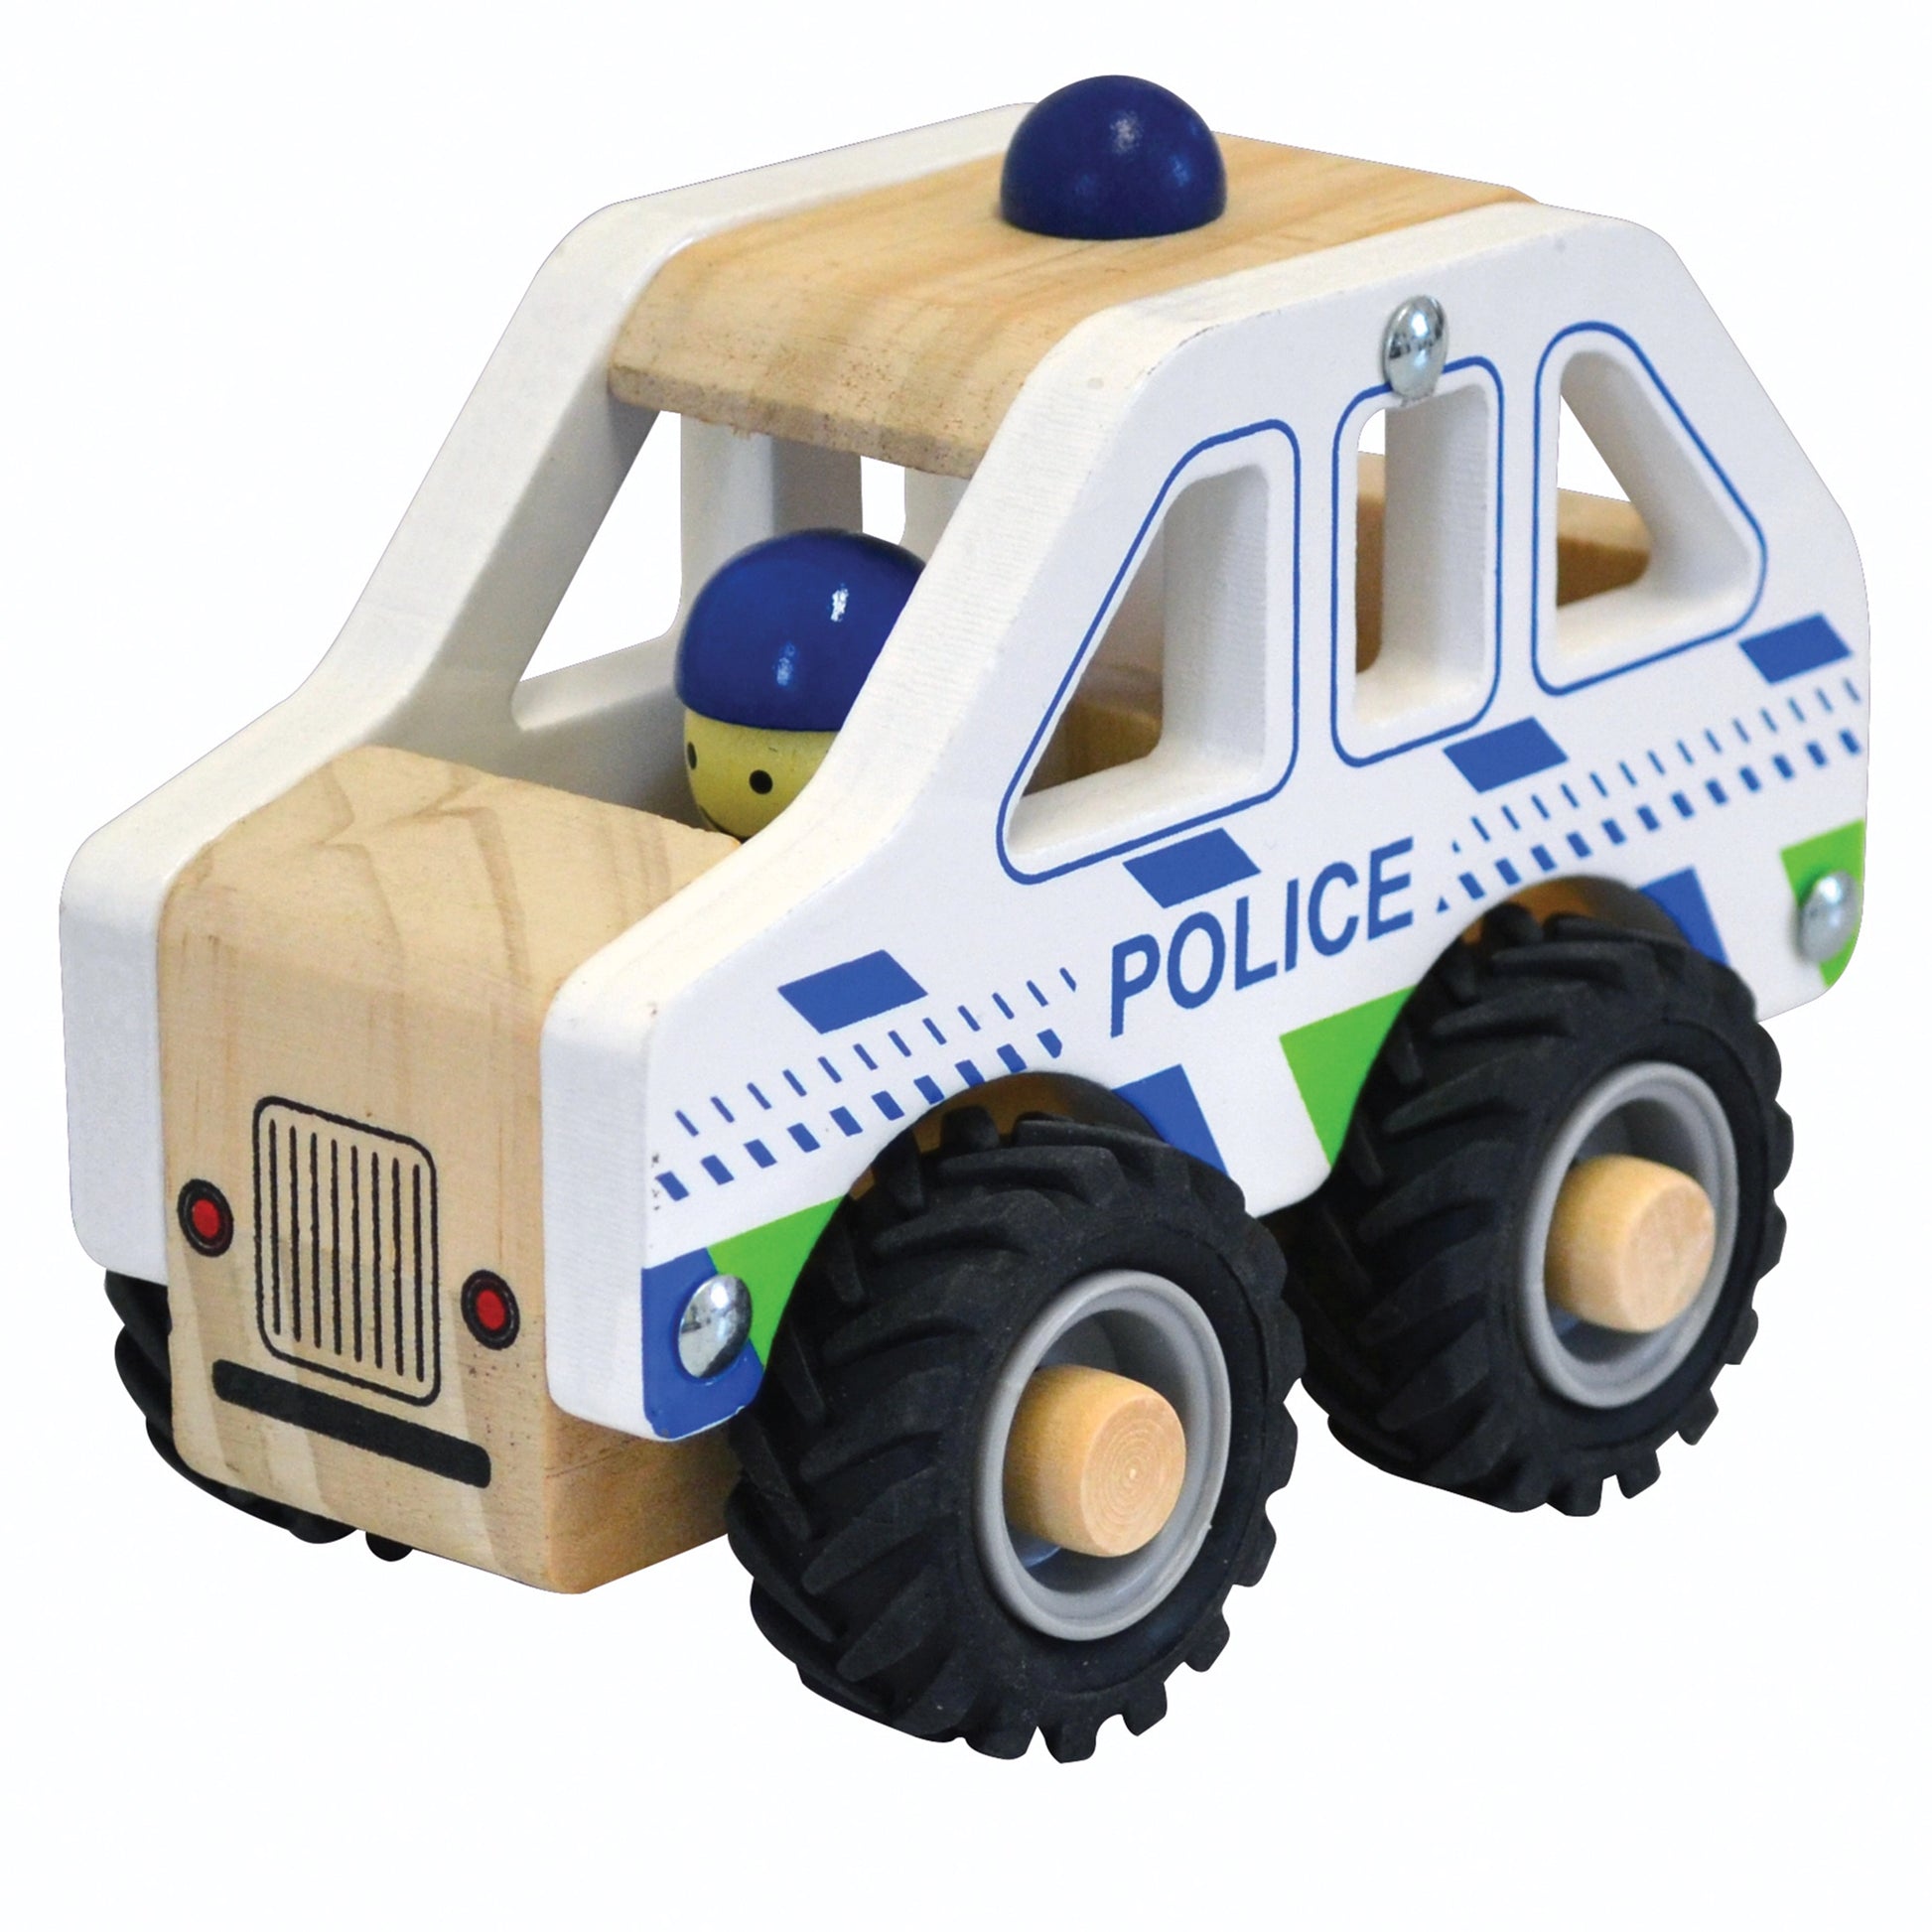 Wooden Brrm-Brrms – Emergency Vehicles - House of Marbles - The Forgotten Toy Shop